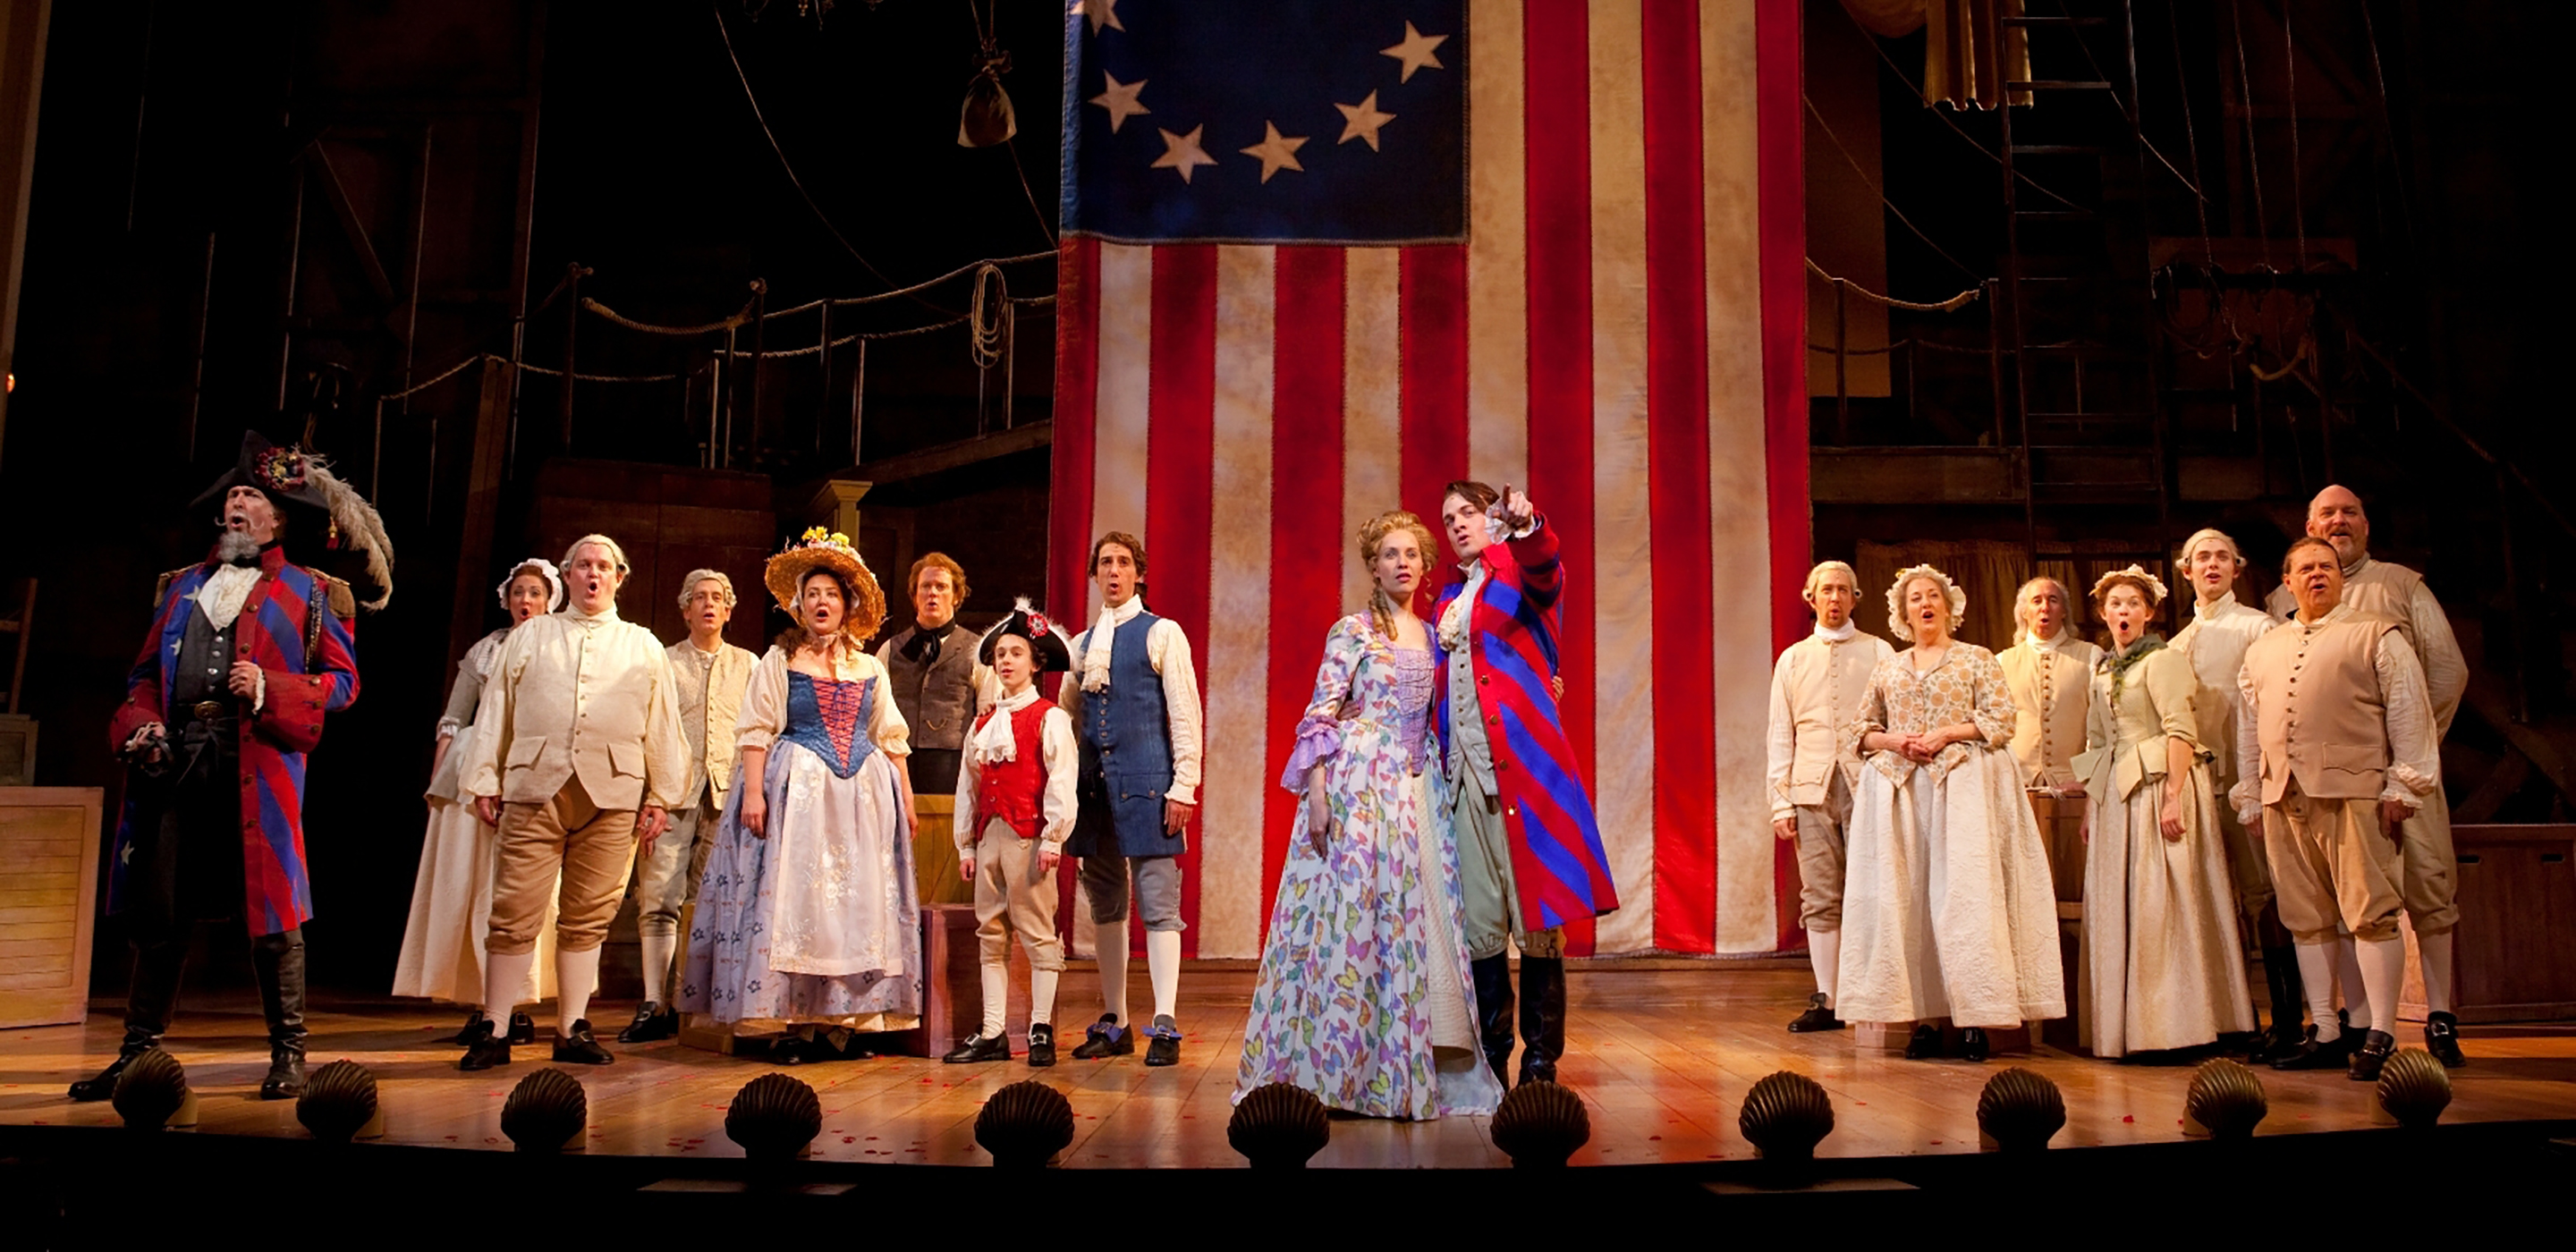 A man in a bright blue and red coat stands next to a a woman in a floral dress and points. Behind them an American flag with 13 stars hangs. To their left and right groups of people in 18th century clothing sing.